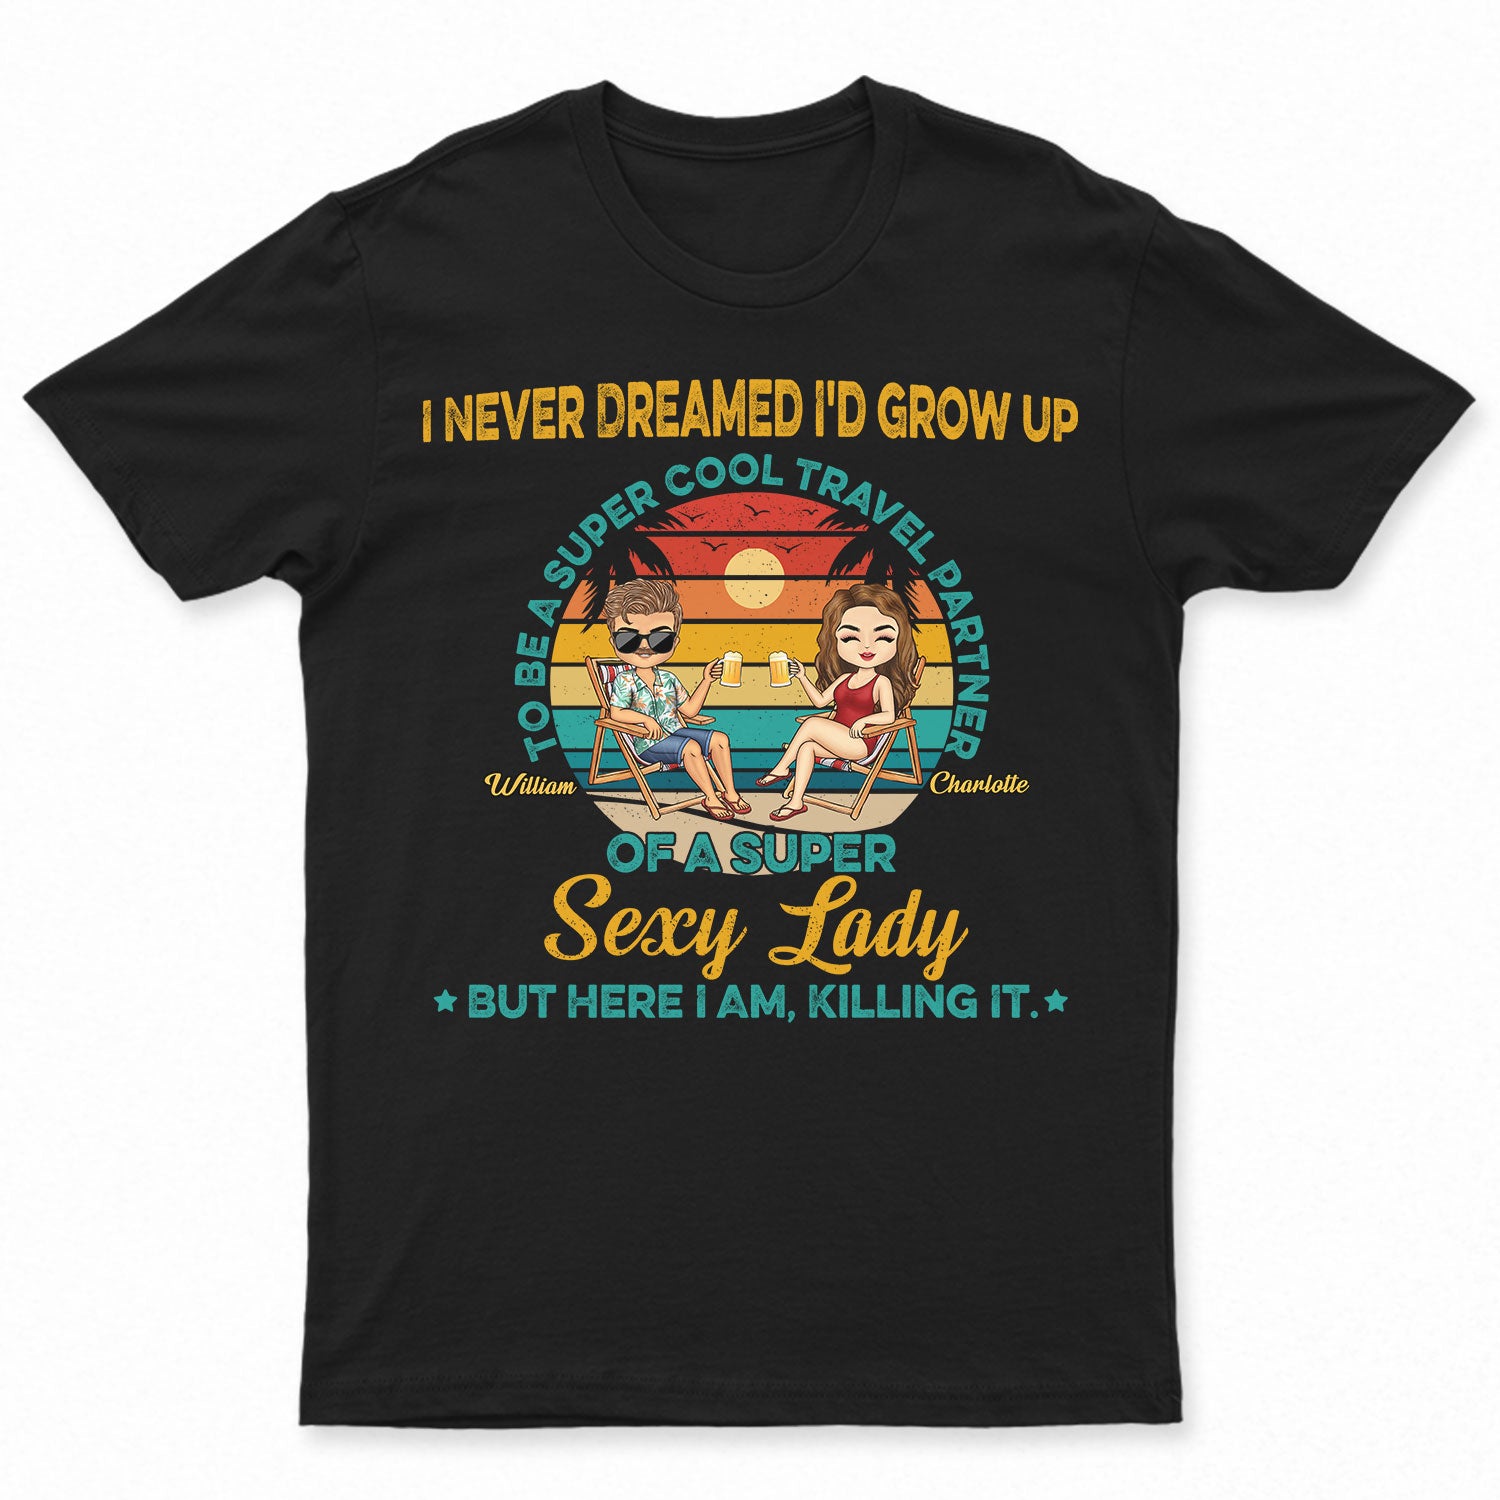 I Never Dreamed I'd Grow Up To Be A Super Cool Travel Partner - Anniversary, Birthday Gift For Spouse, Boyfriend, Girlfriend, Husband, Wife, Traveling Lovers - Personalized Custom T Shirt